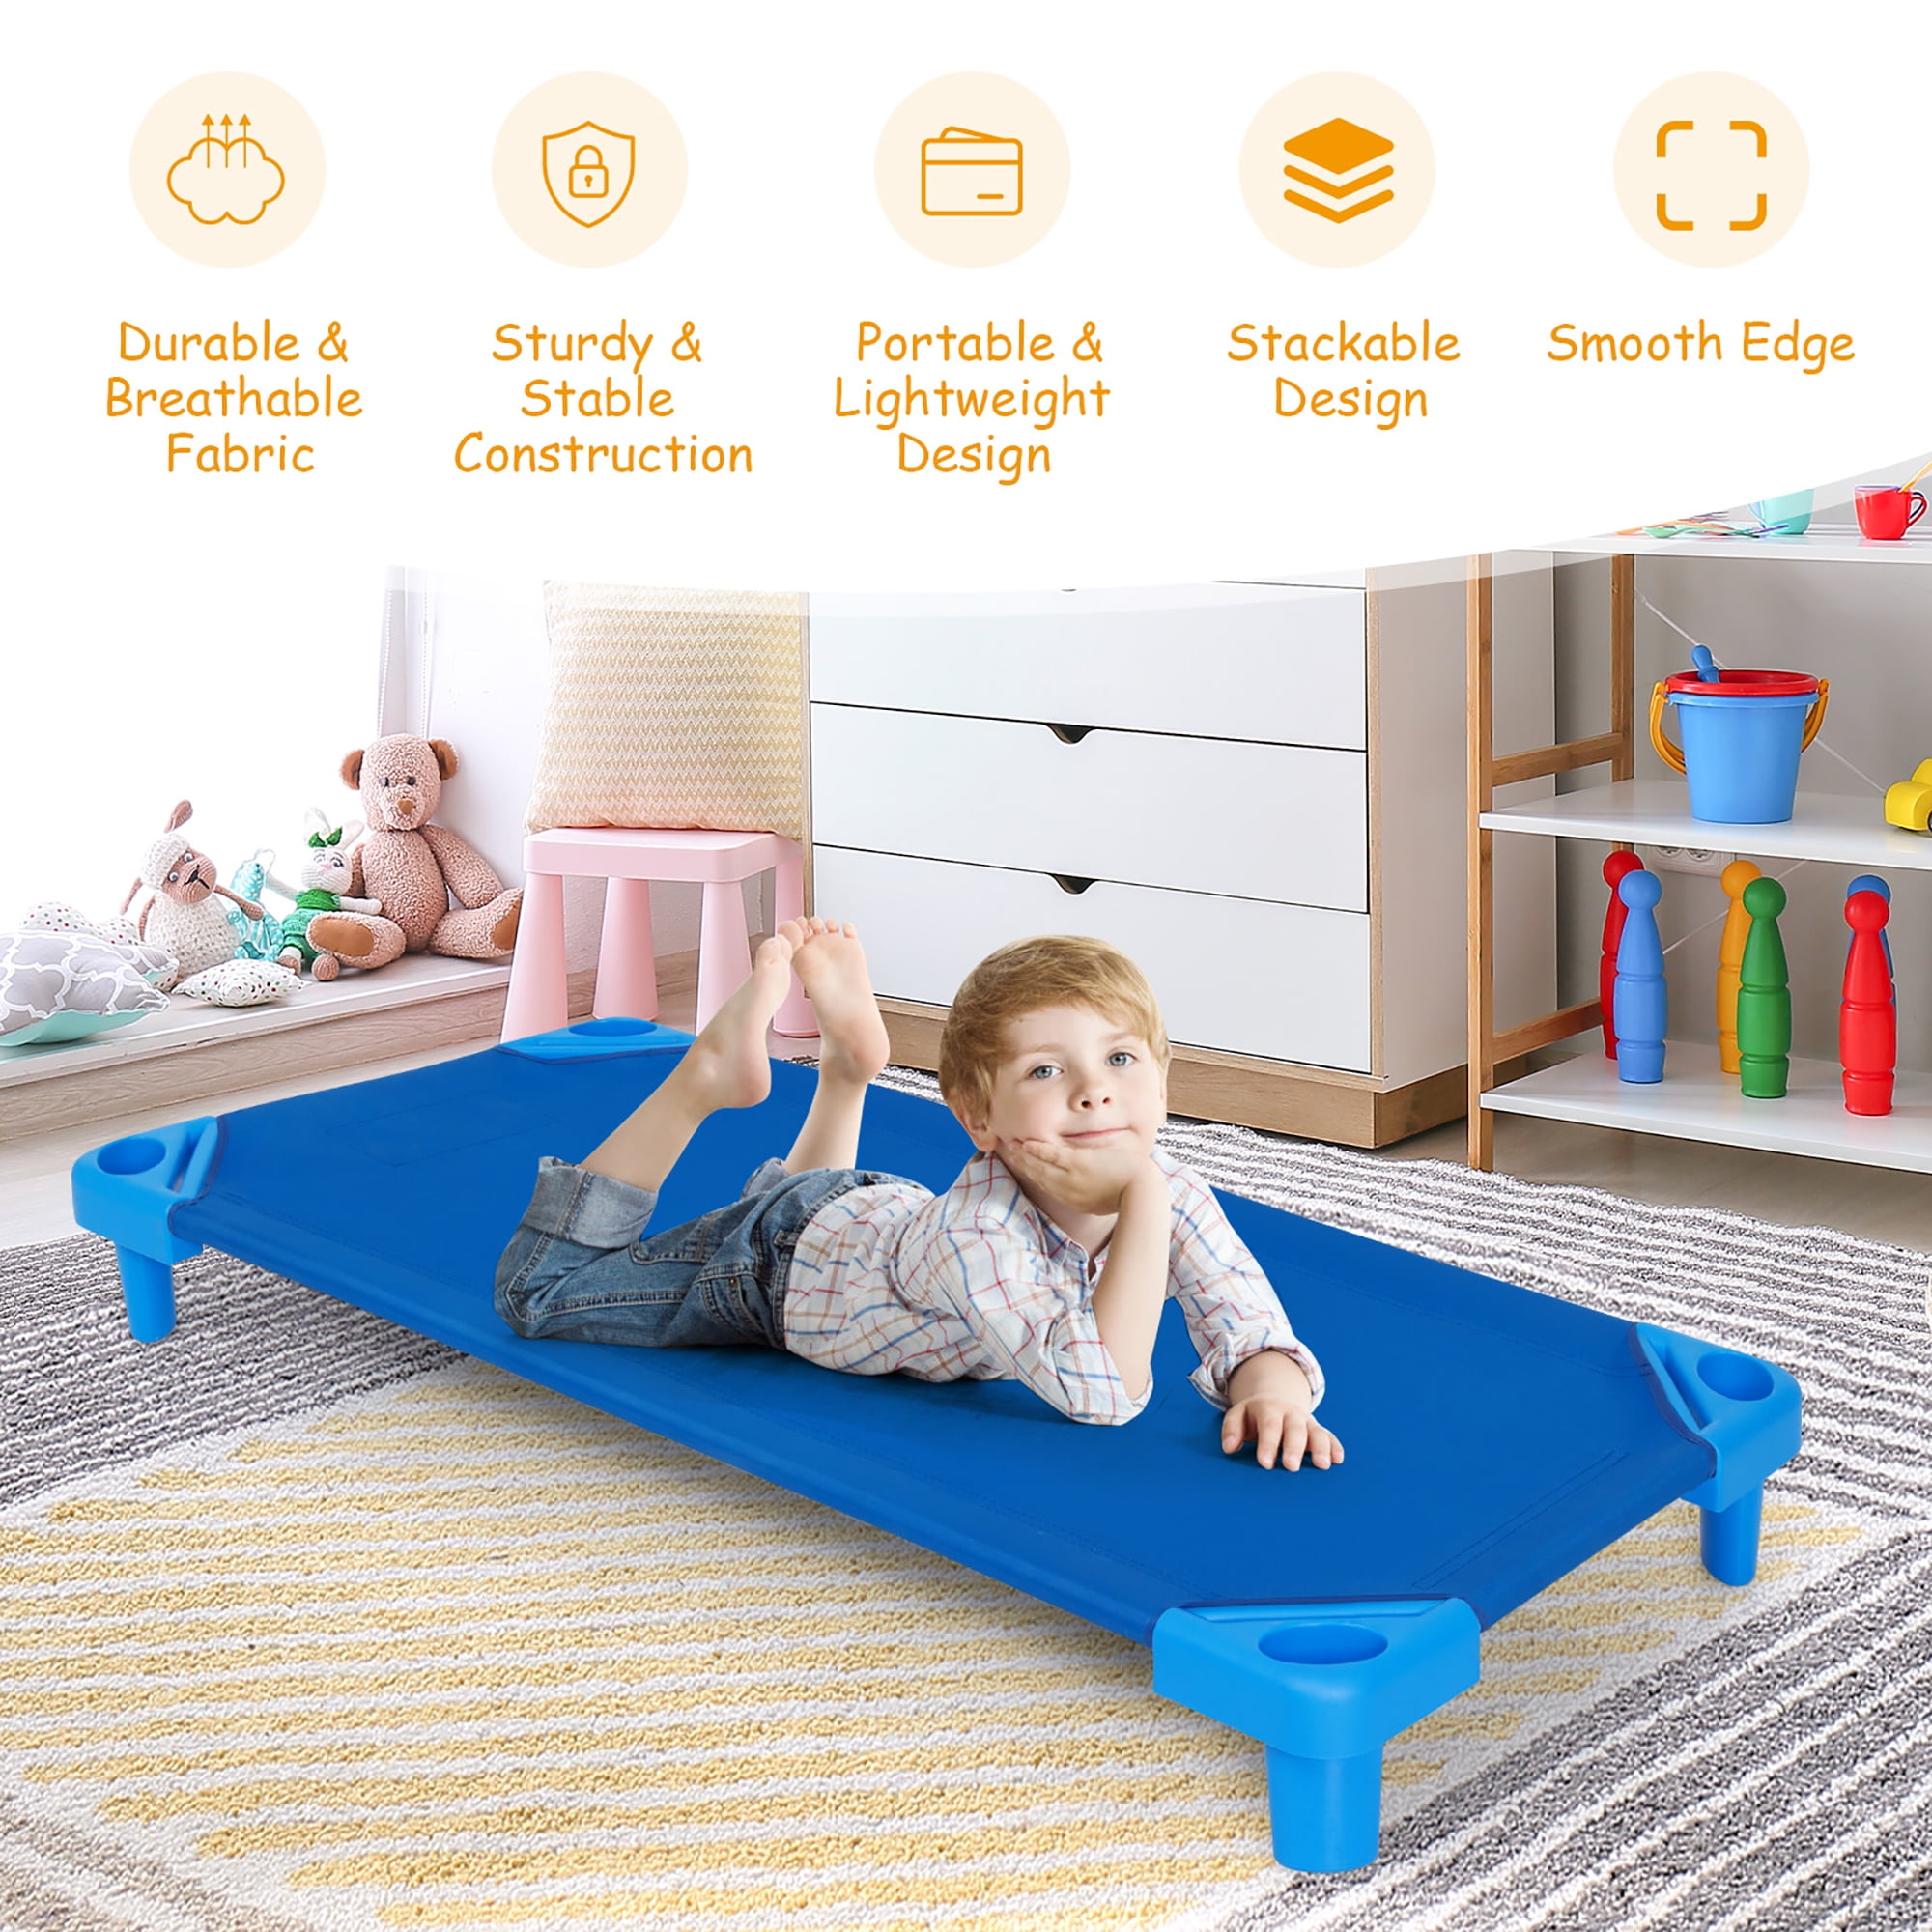  Leinuosen 6 Pcs Stackable Sleeping Daycare Cots for Kids 52 L  x 23 W Daycare Toddler Nap Cots Preschool Classroom Daycare Beds Daycare  Furniture, Ready to Assemble for Kids Sleeping Resting